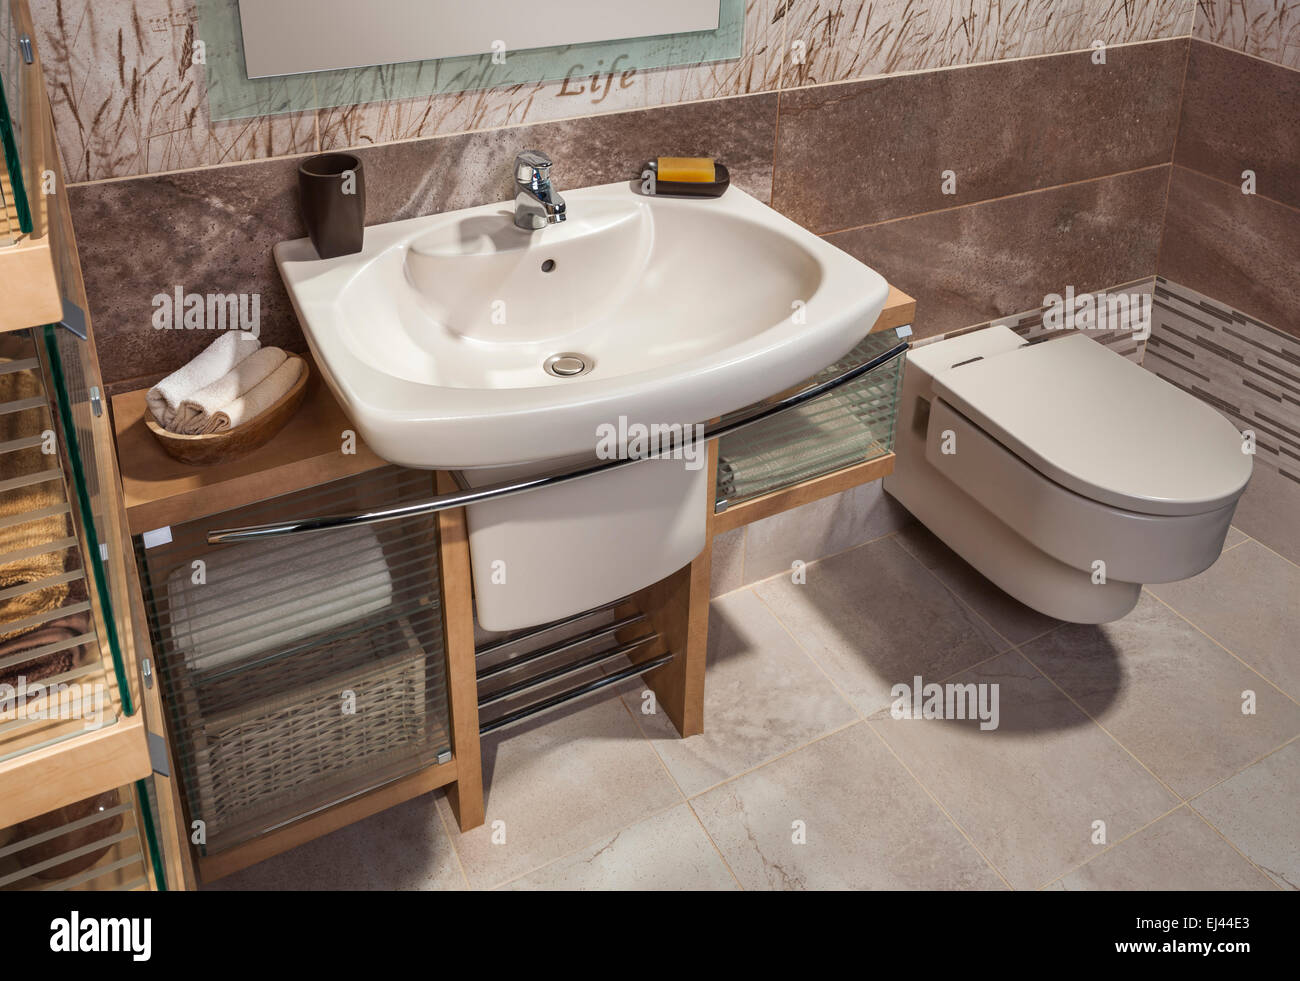 detail of a modern bathroom with sink, toilet and cabinet Stock Photo